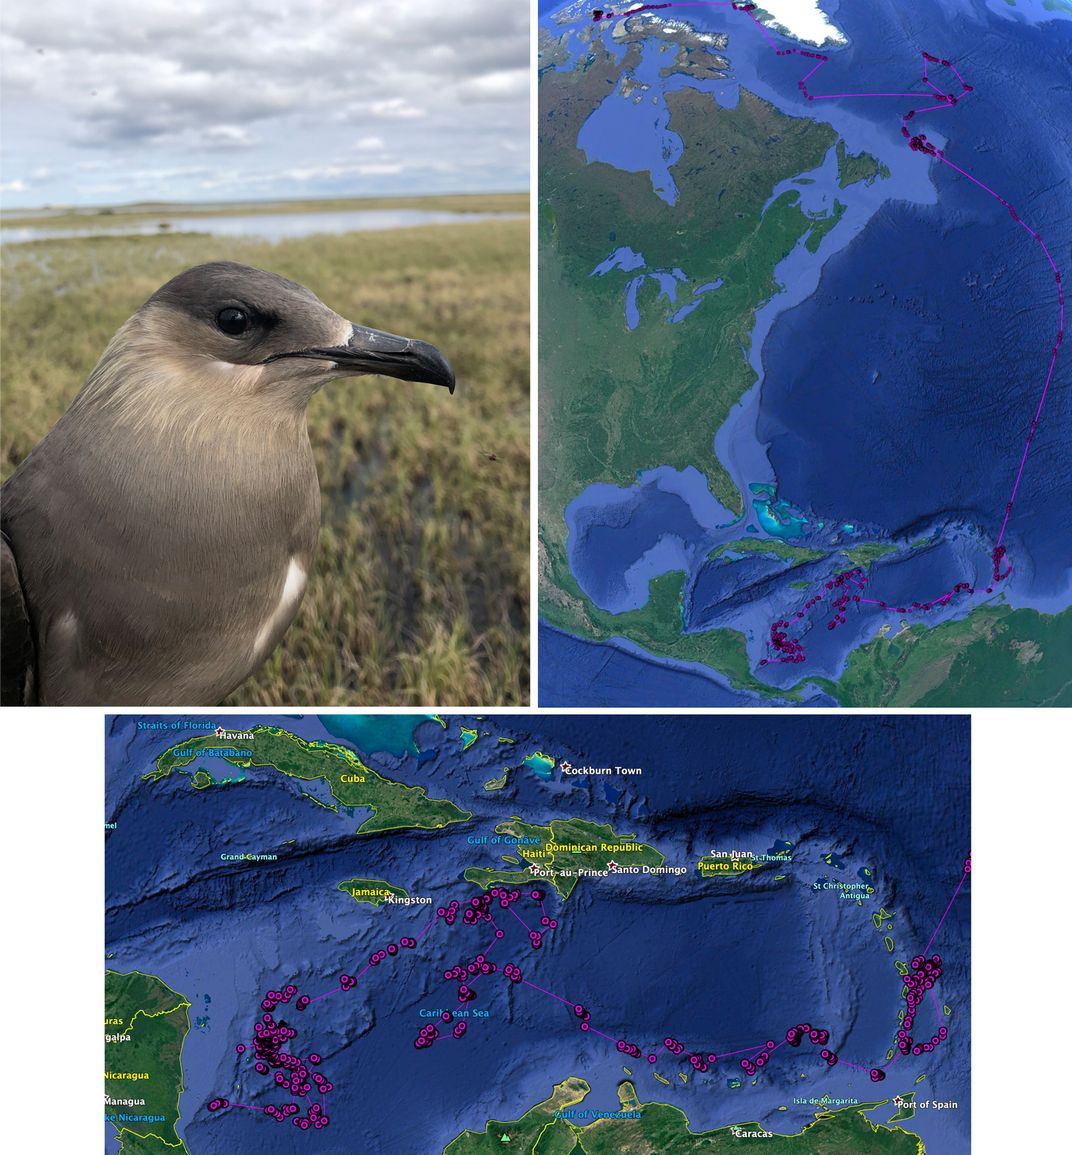 Top left: a seabird called a parasitic jaeger; top right: a map of the jaeger's migratory path from the Arctic to Caribbean; bottom: zoomed-in portion of map of jaeger's movement over Caribbean Sea